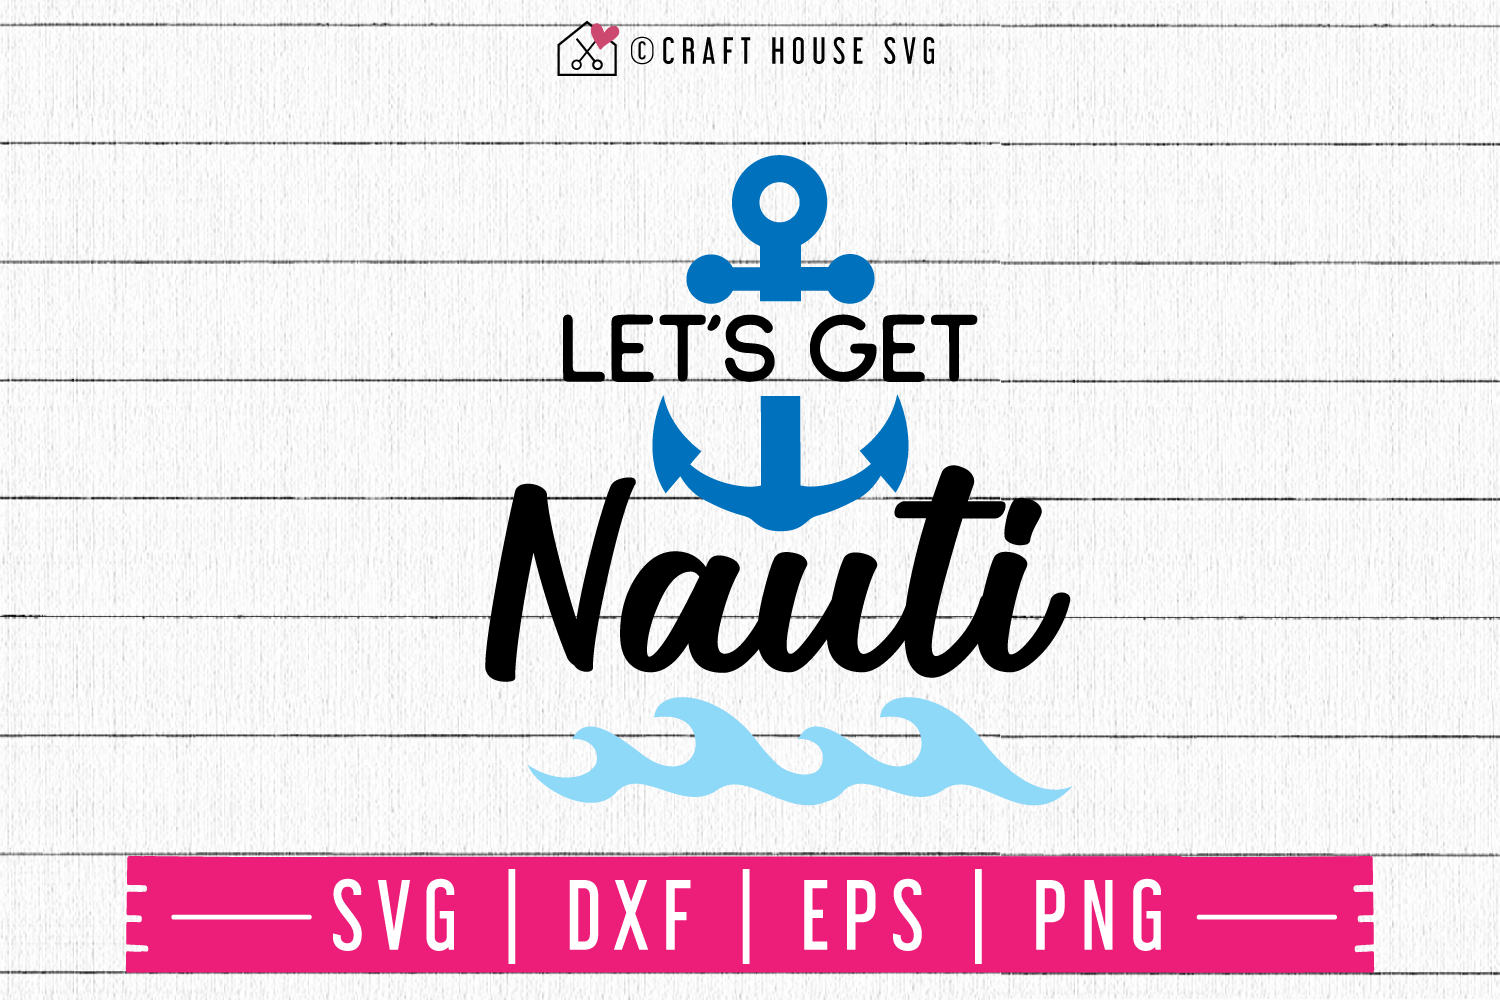 Lets get nauti SVG | M48F | A Summer SVG cut file Craft House SVG - SVG files for Cricut and Silhouette